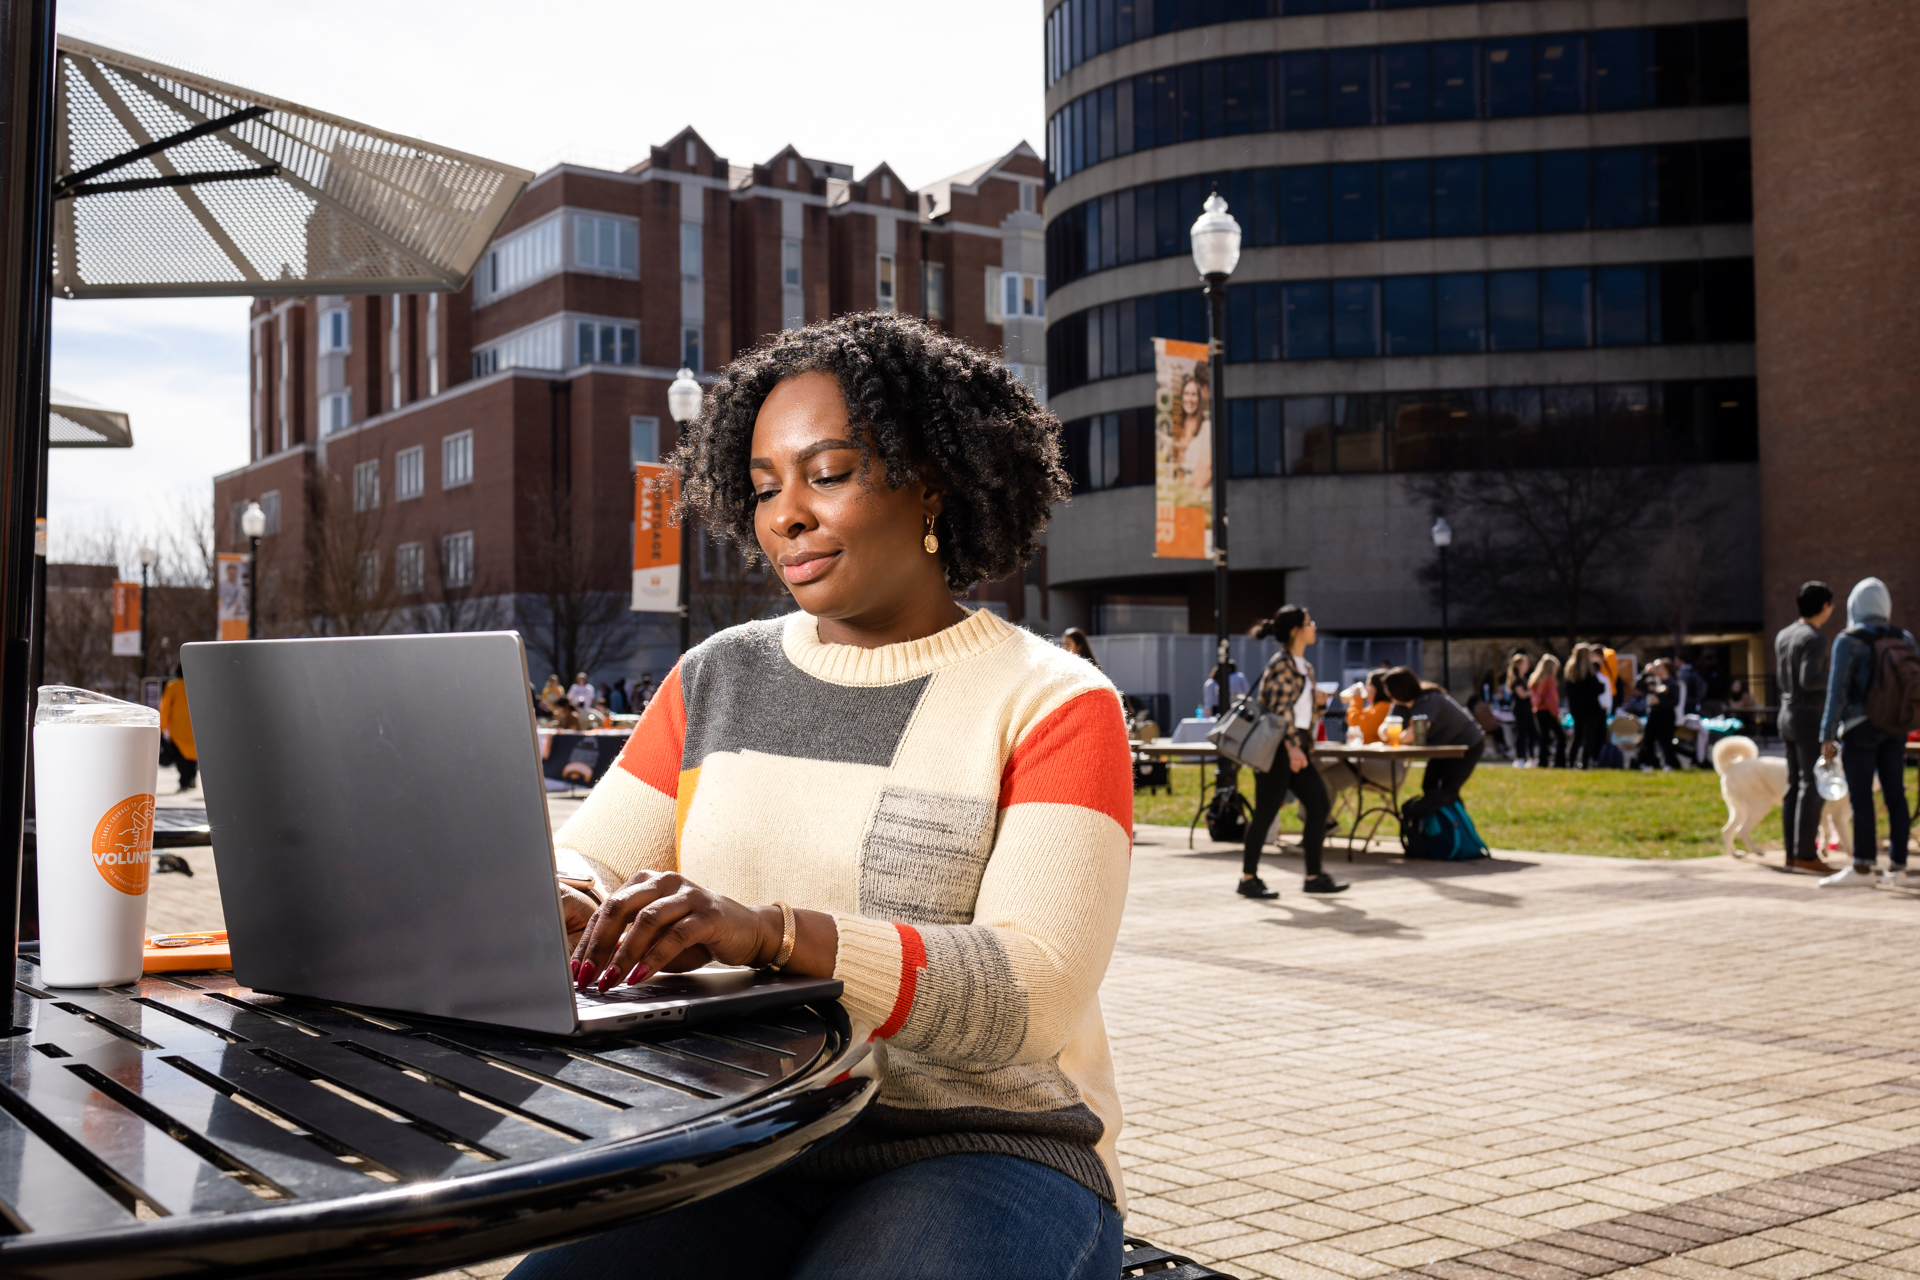 MSSW student working on laptop outside of Student Union on University of tennessee campus